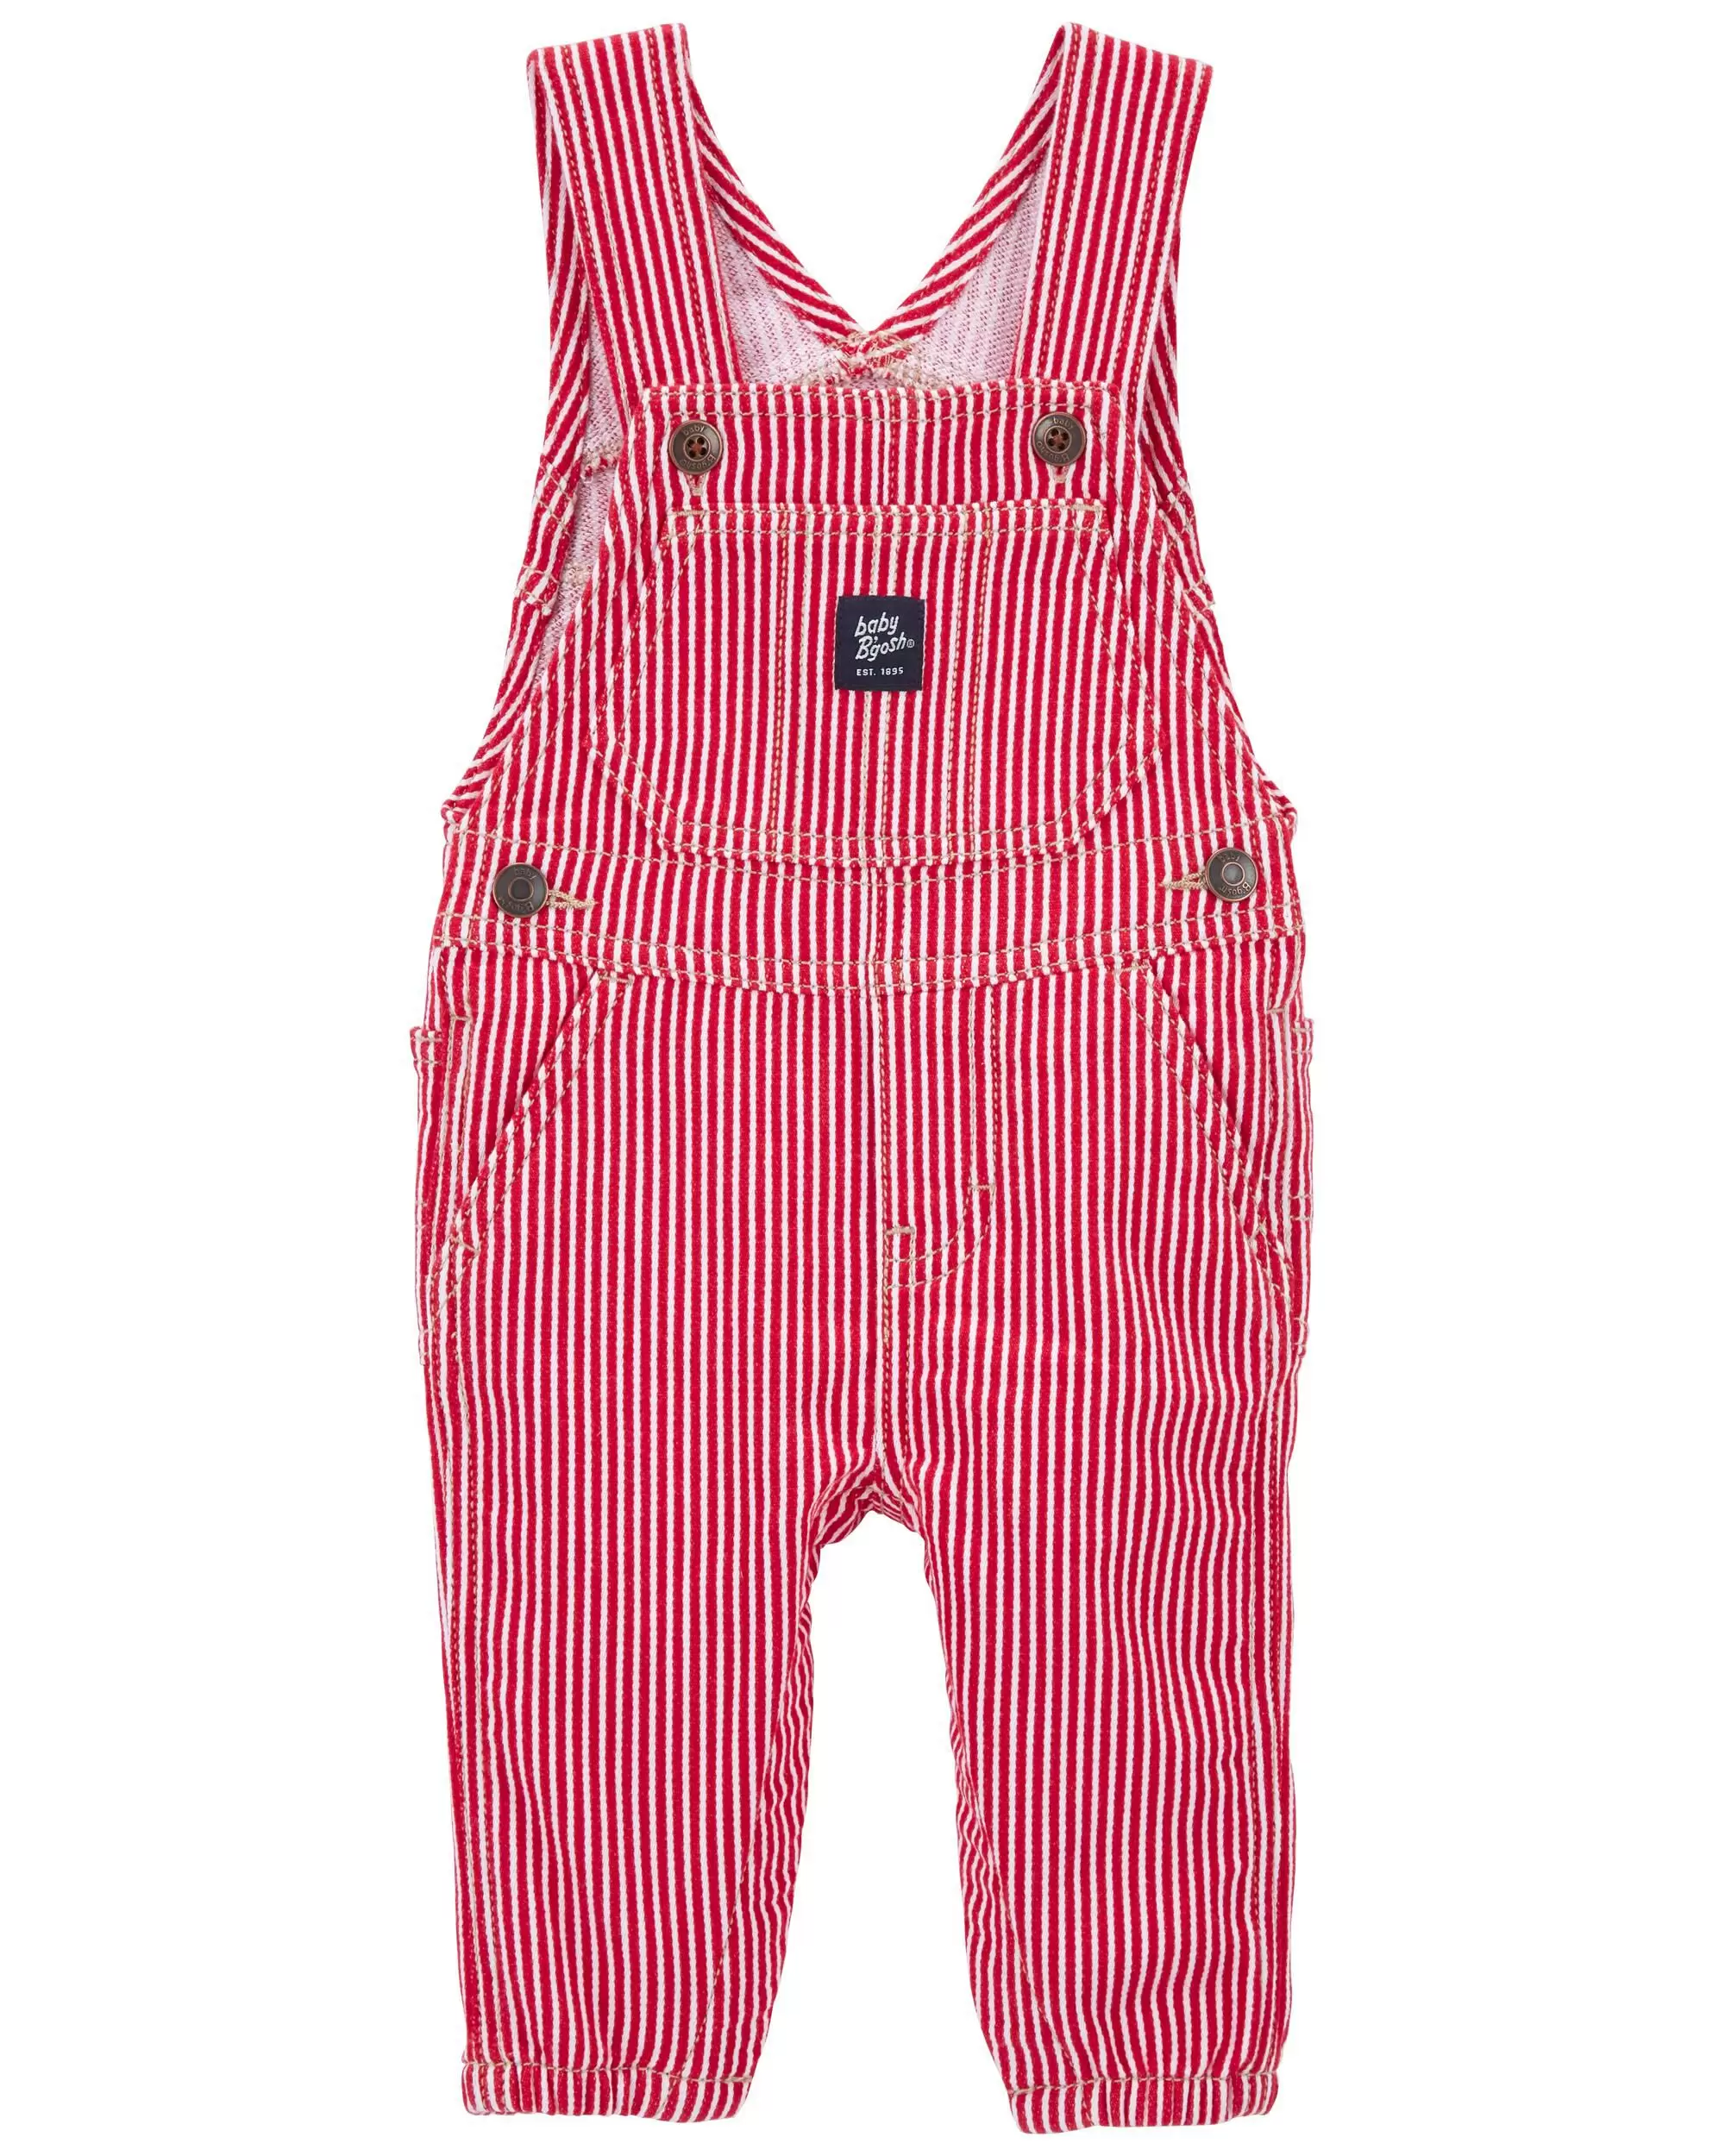 Baby Stretchy Hickory Stripe Overalls Carter's